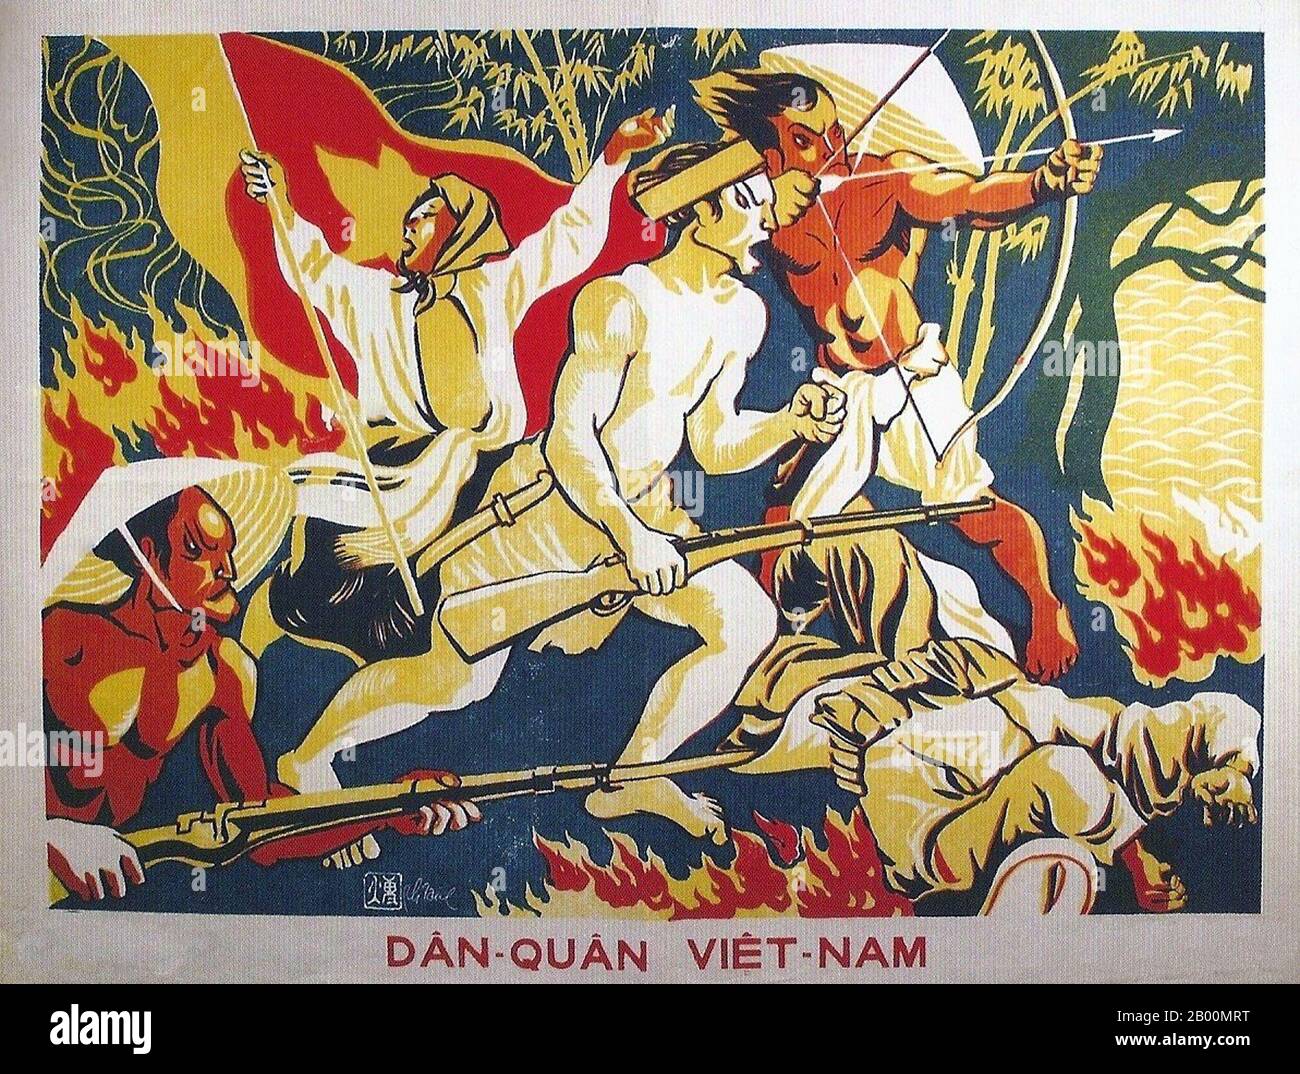 Vietnam: 'Dân-Quân Viêt-Nam (Civil and Military of Vietnam)'. Viet Minh poster, c. 1954.  North Vietnam, also called the Democratic Republic of Vietnam (DRV) (Vietnamese: Việt Nam Dân chủ Cộng hòa), was a communist state that ruled the northern half of Vietnam from 1954 until 1976. Following the Geneva Accords of 1954, Vietnam was partitioned at the 17th parallel. The DRV became the government of North Vietnam while the State of Vietnam retained control in the South. Stock Photo